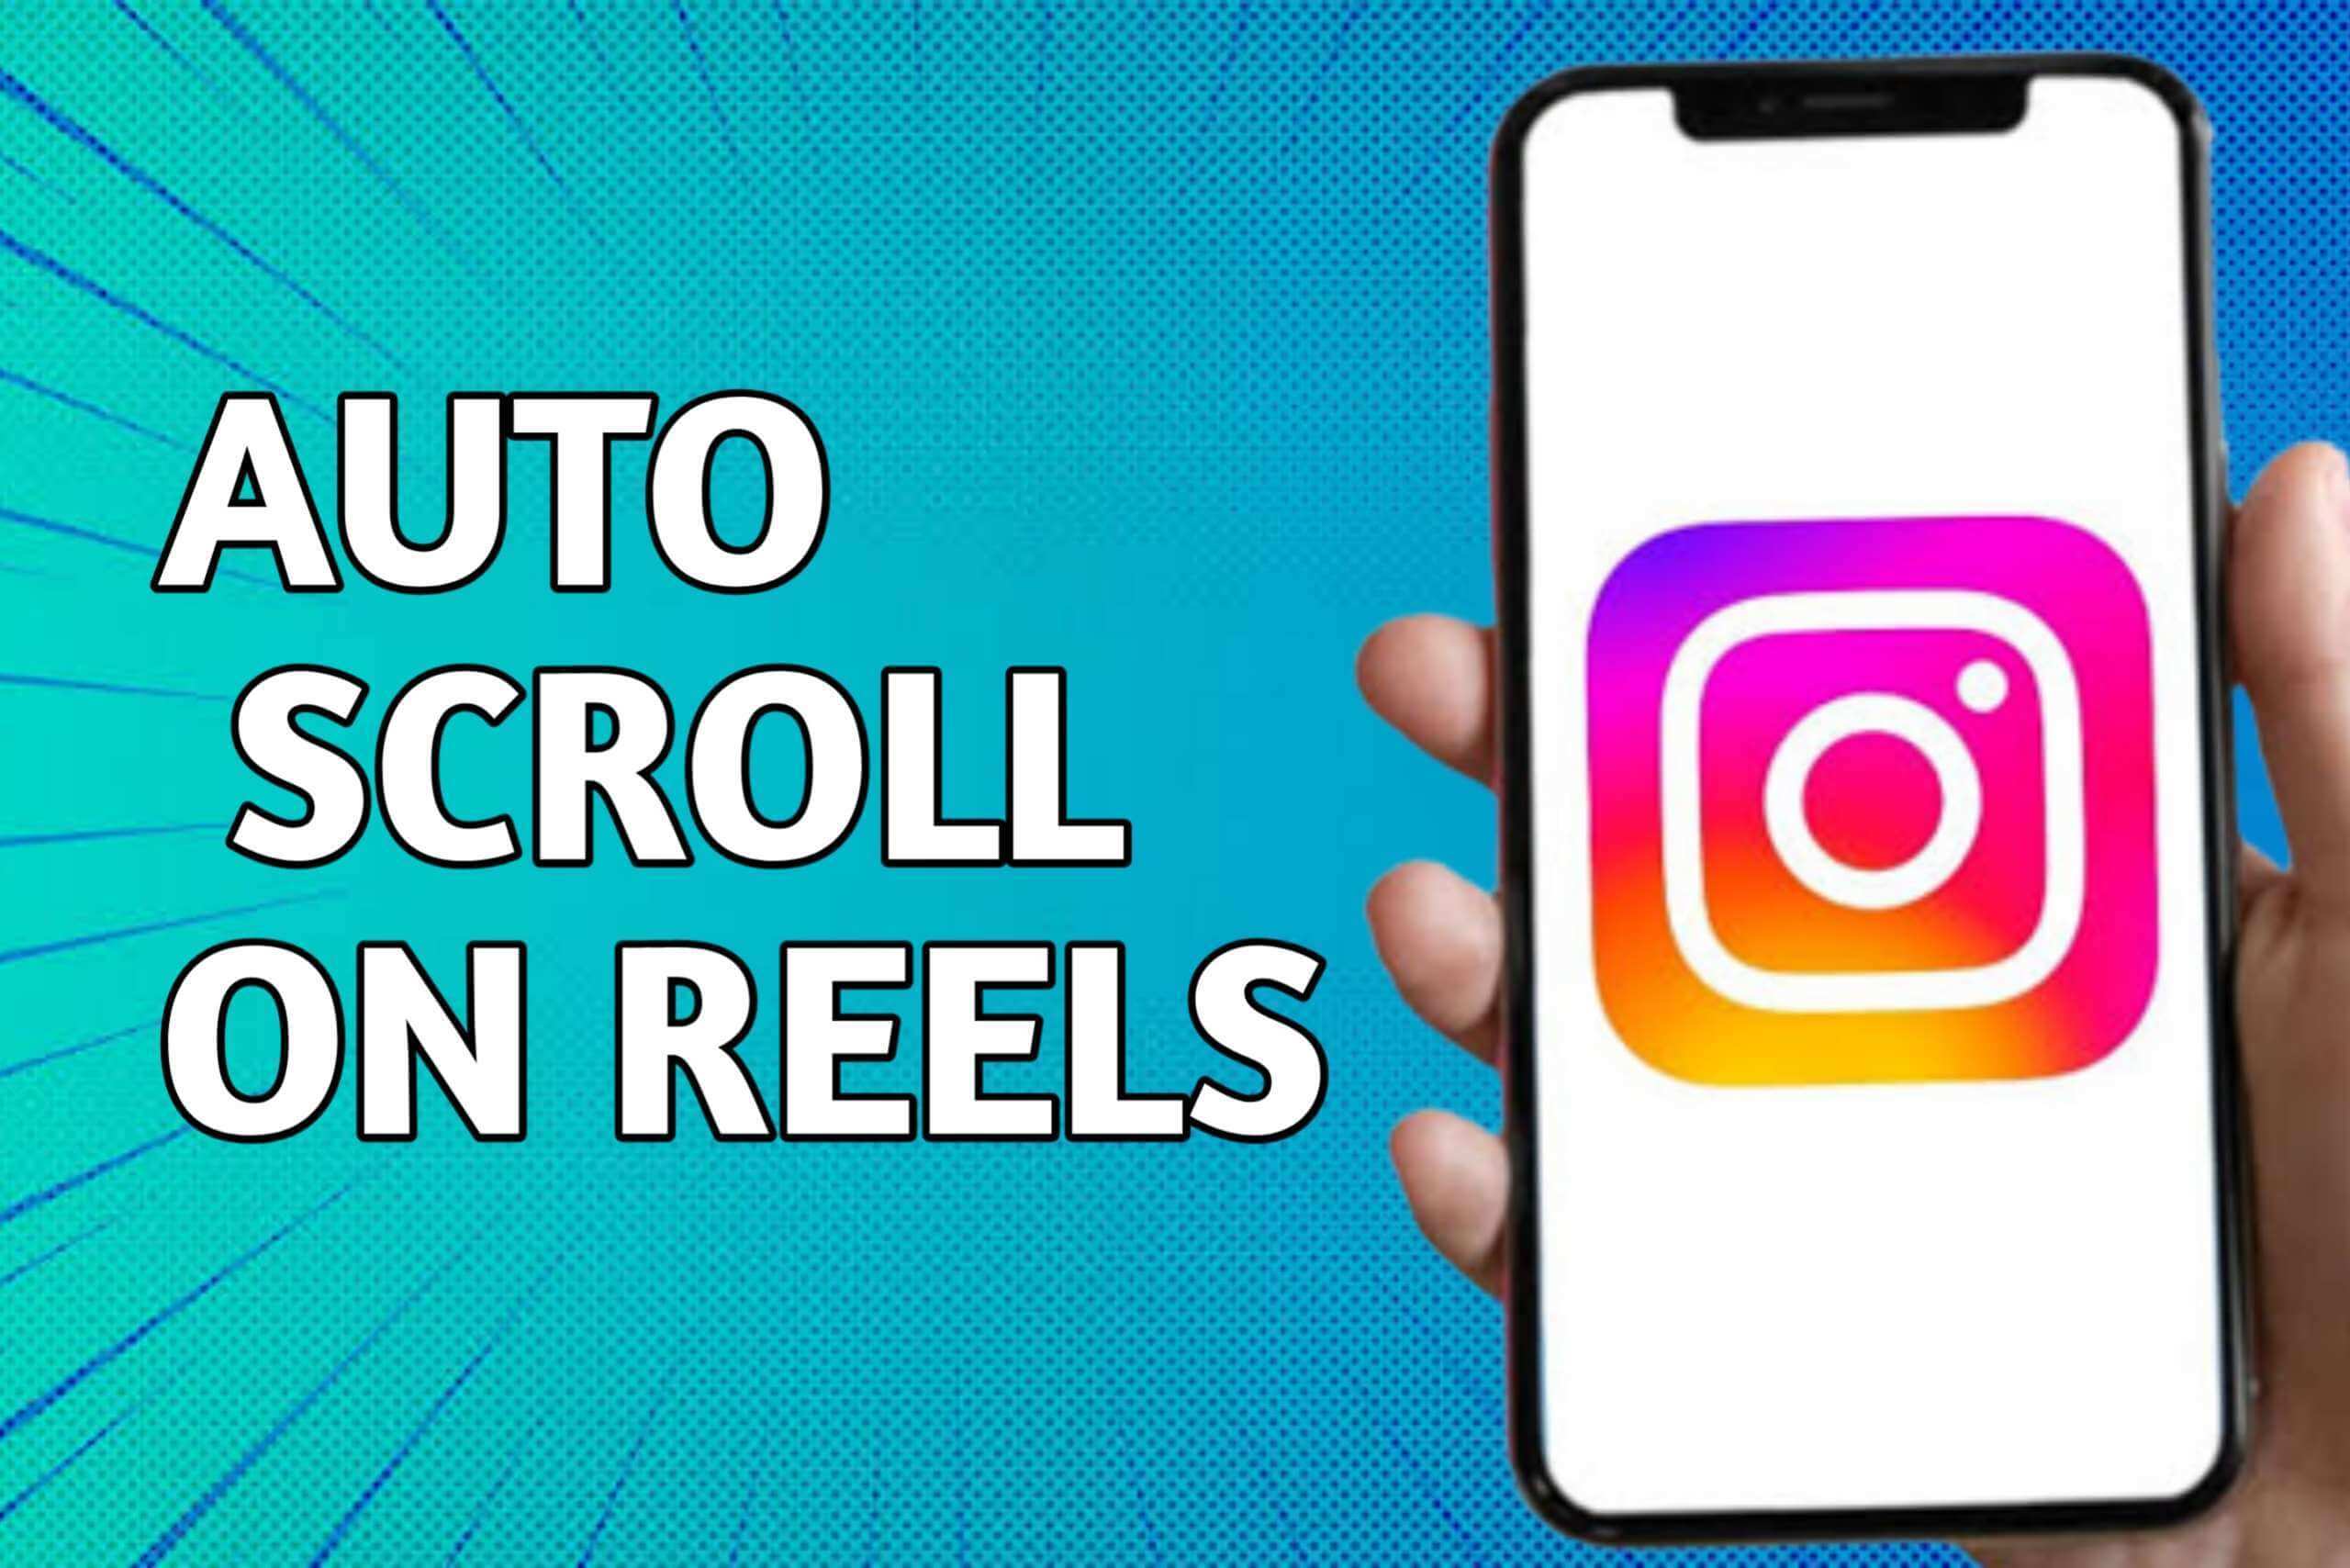 How To Auto Scroll On Instagram Reels ! (EASY TUTORIAL) 